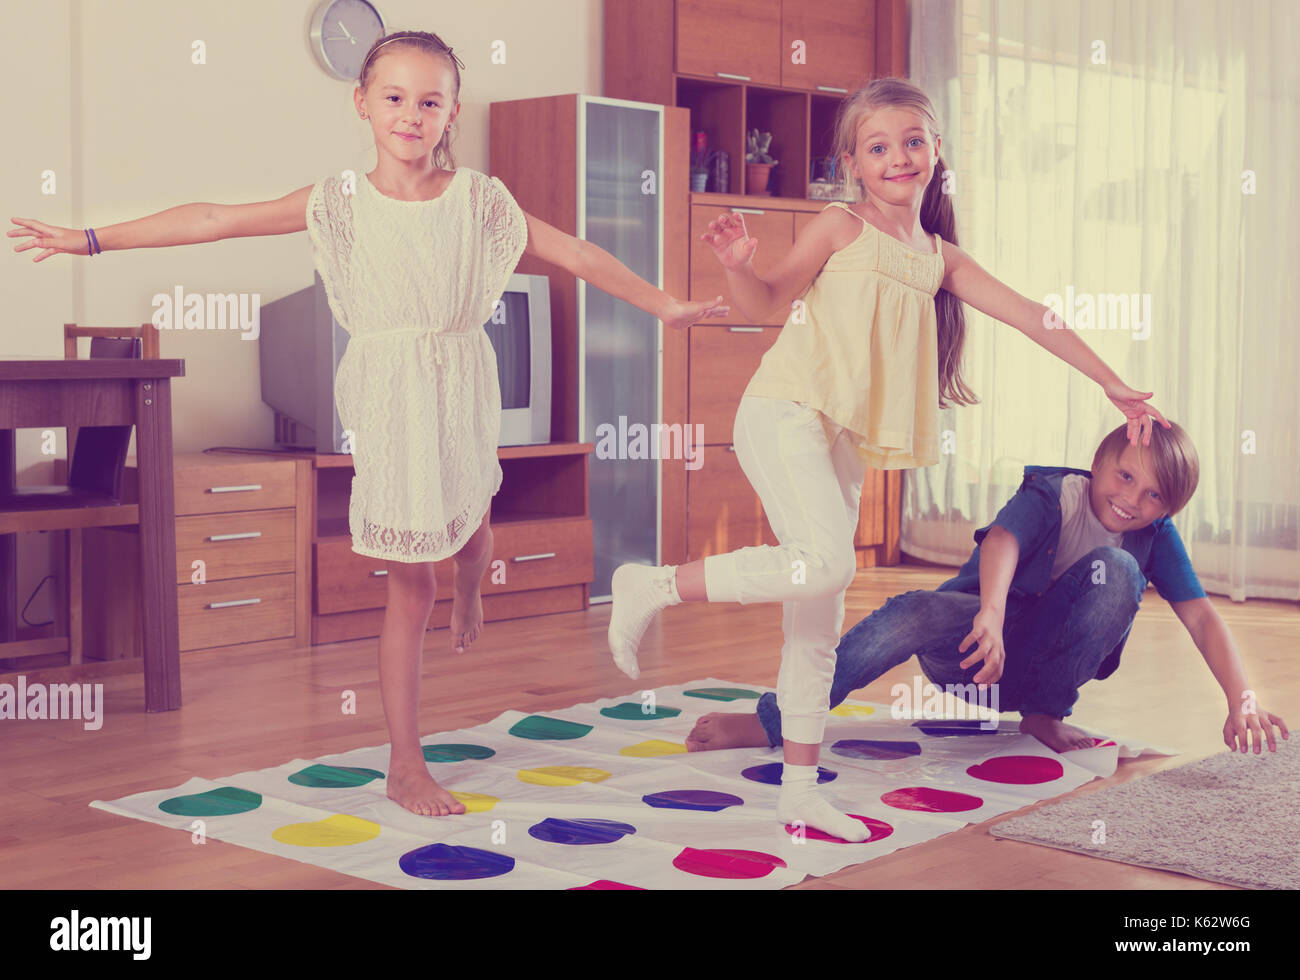 Group of happy children playing at twister in interior Stock Photo